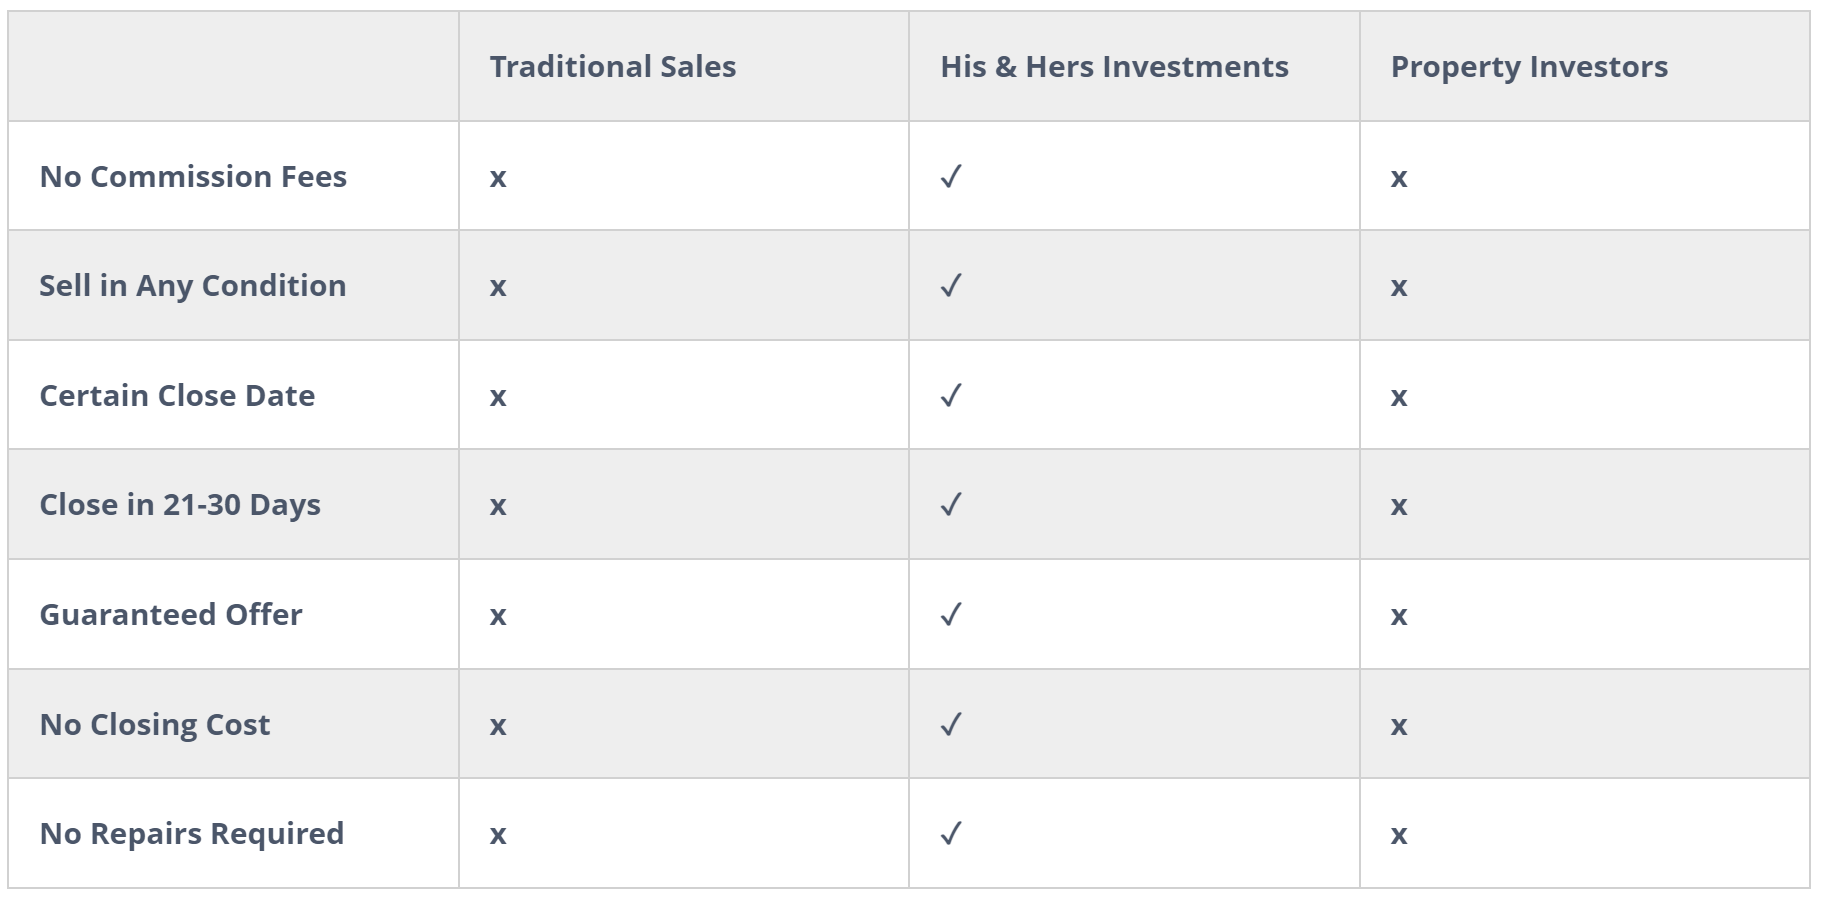 His and Hers Investments Comparison Table